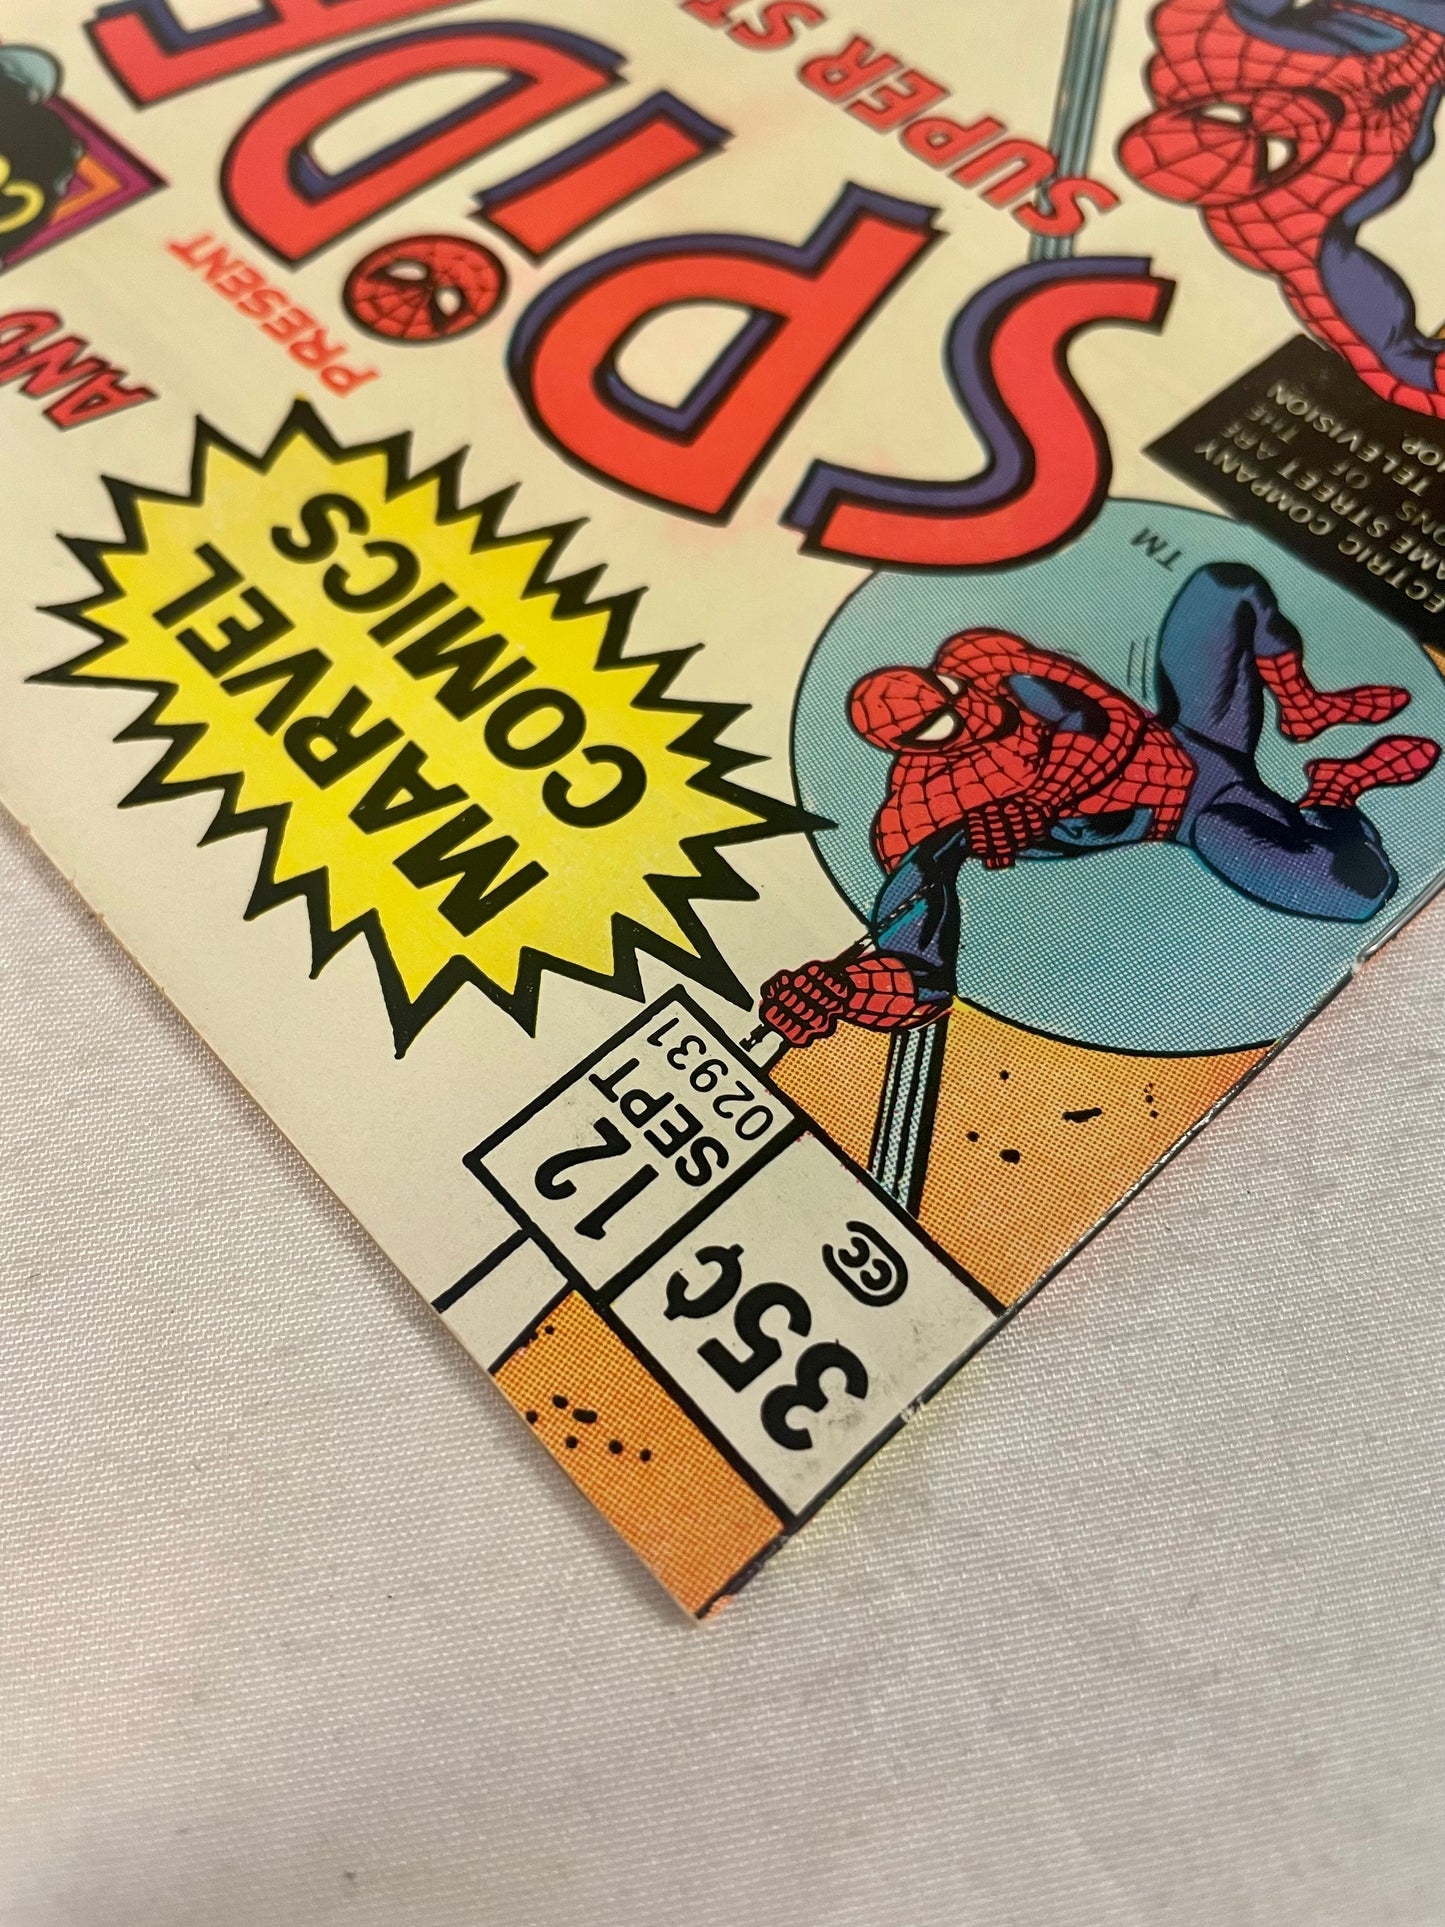 Marvel Comics And The Electric Company Presents Spidey Super Stories #12